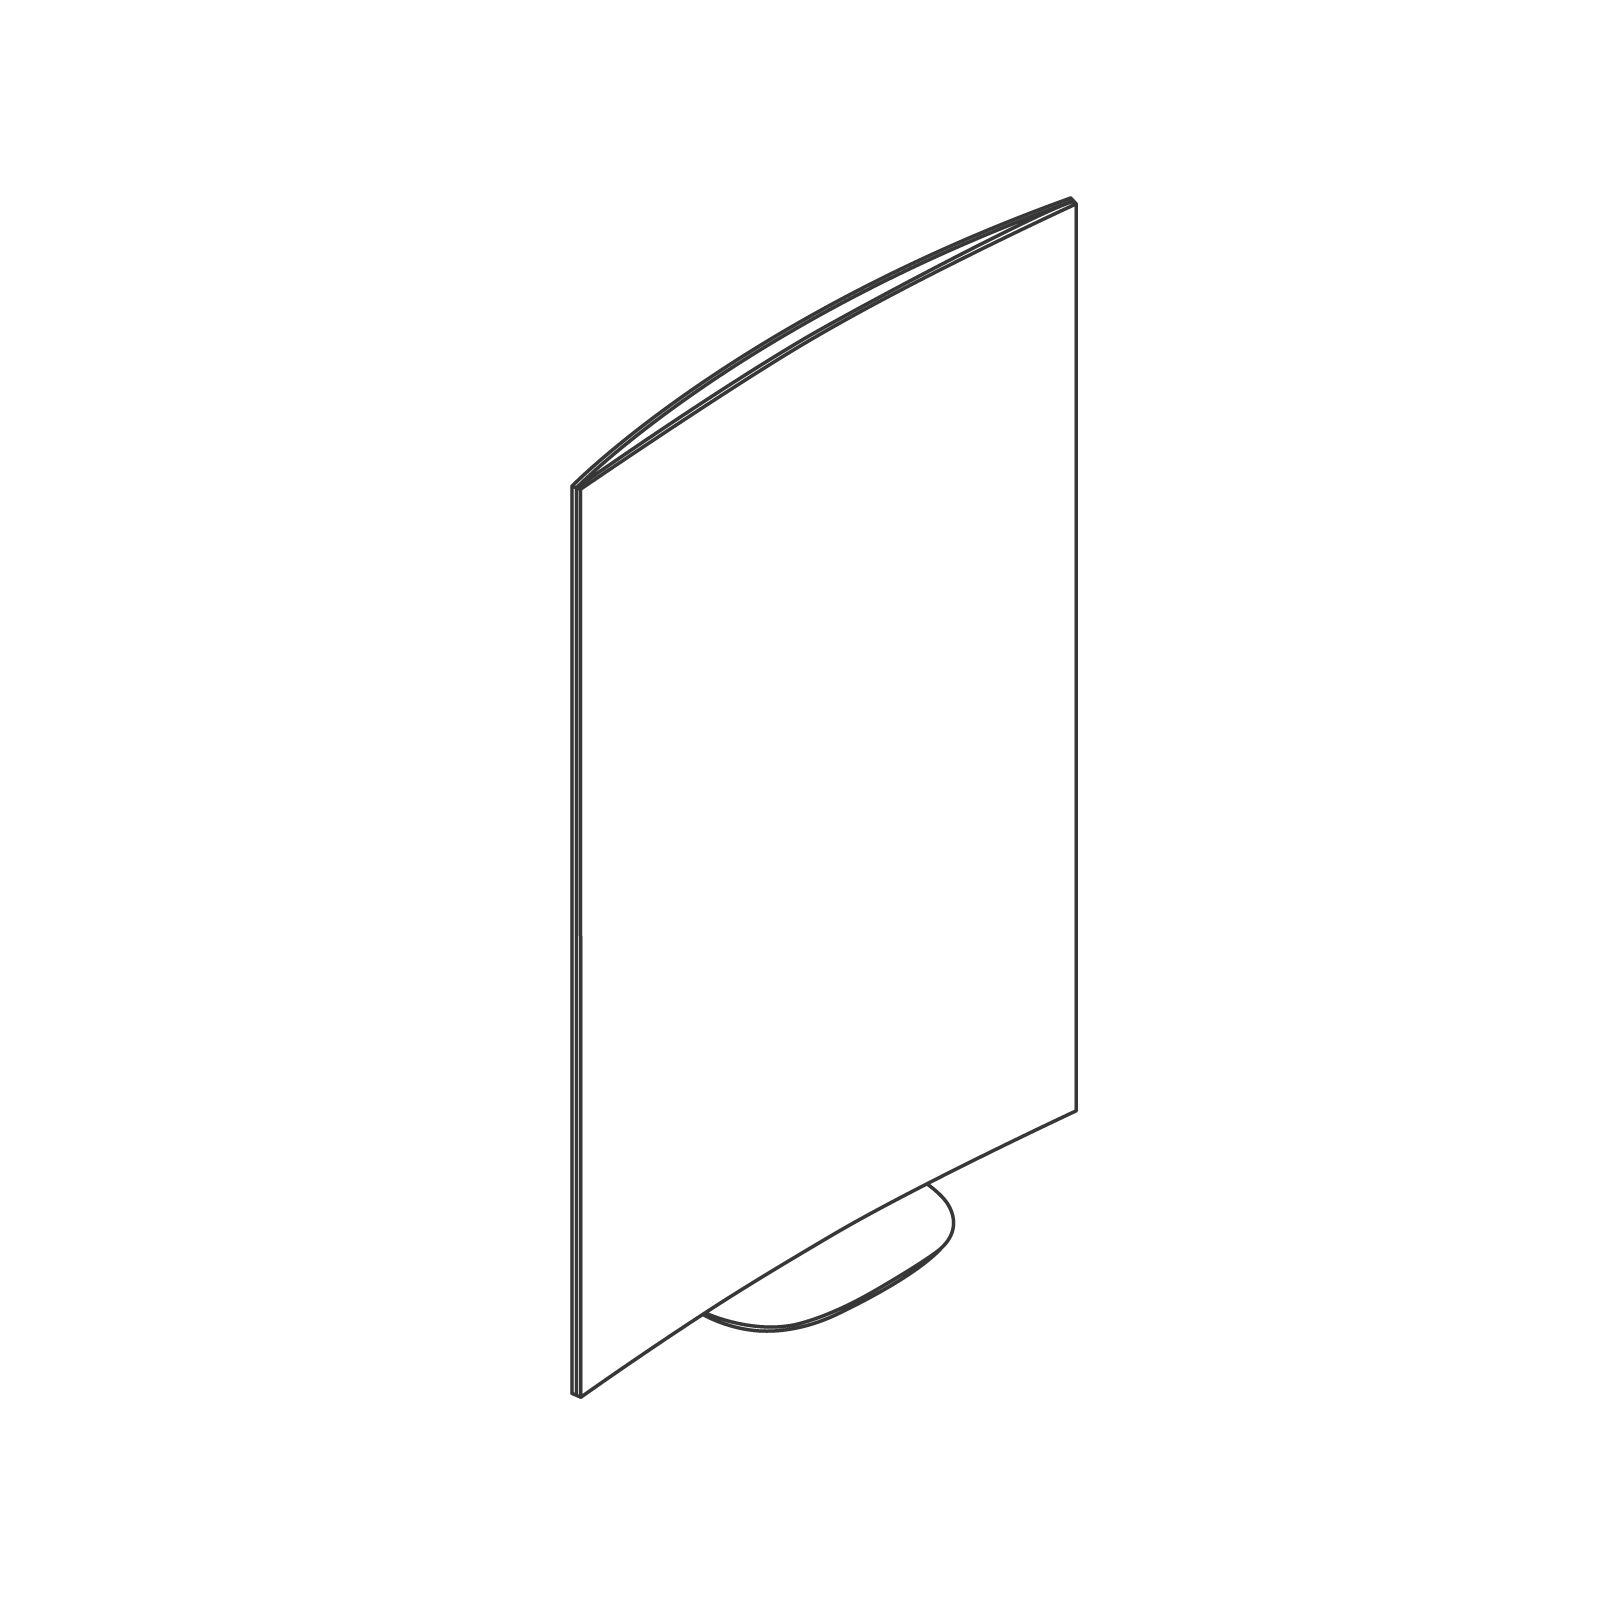 A line drawing - OE1 Curved Screen